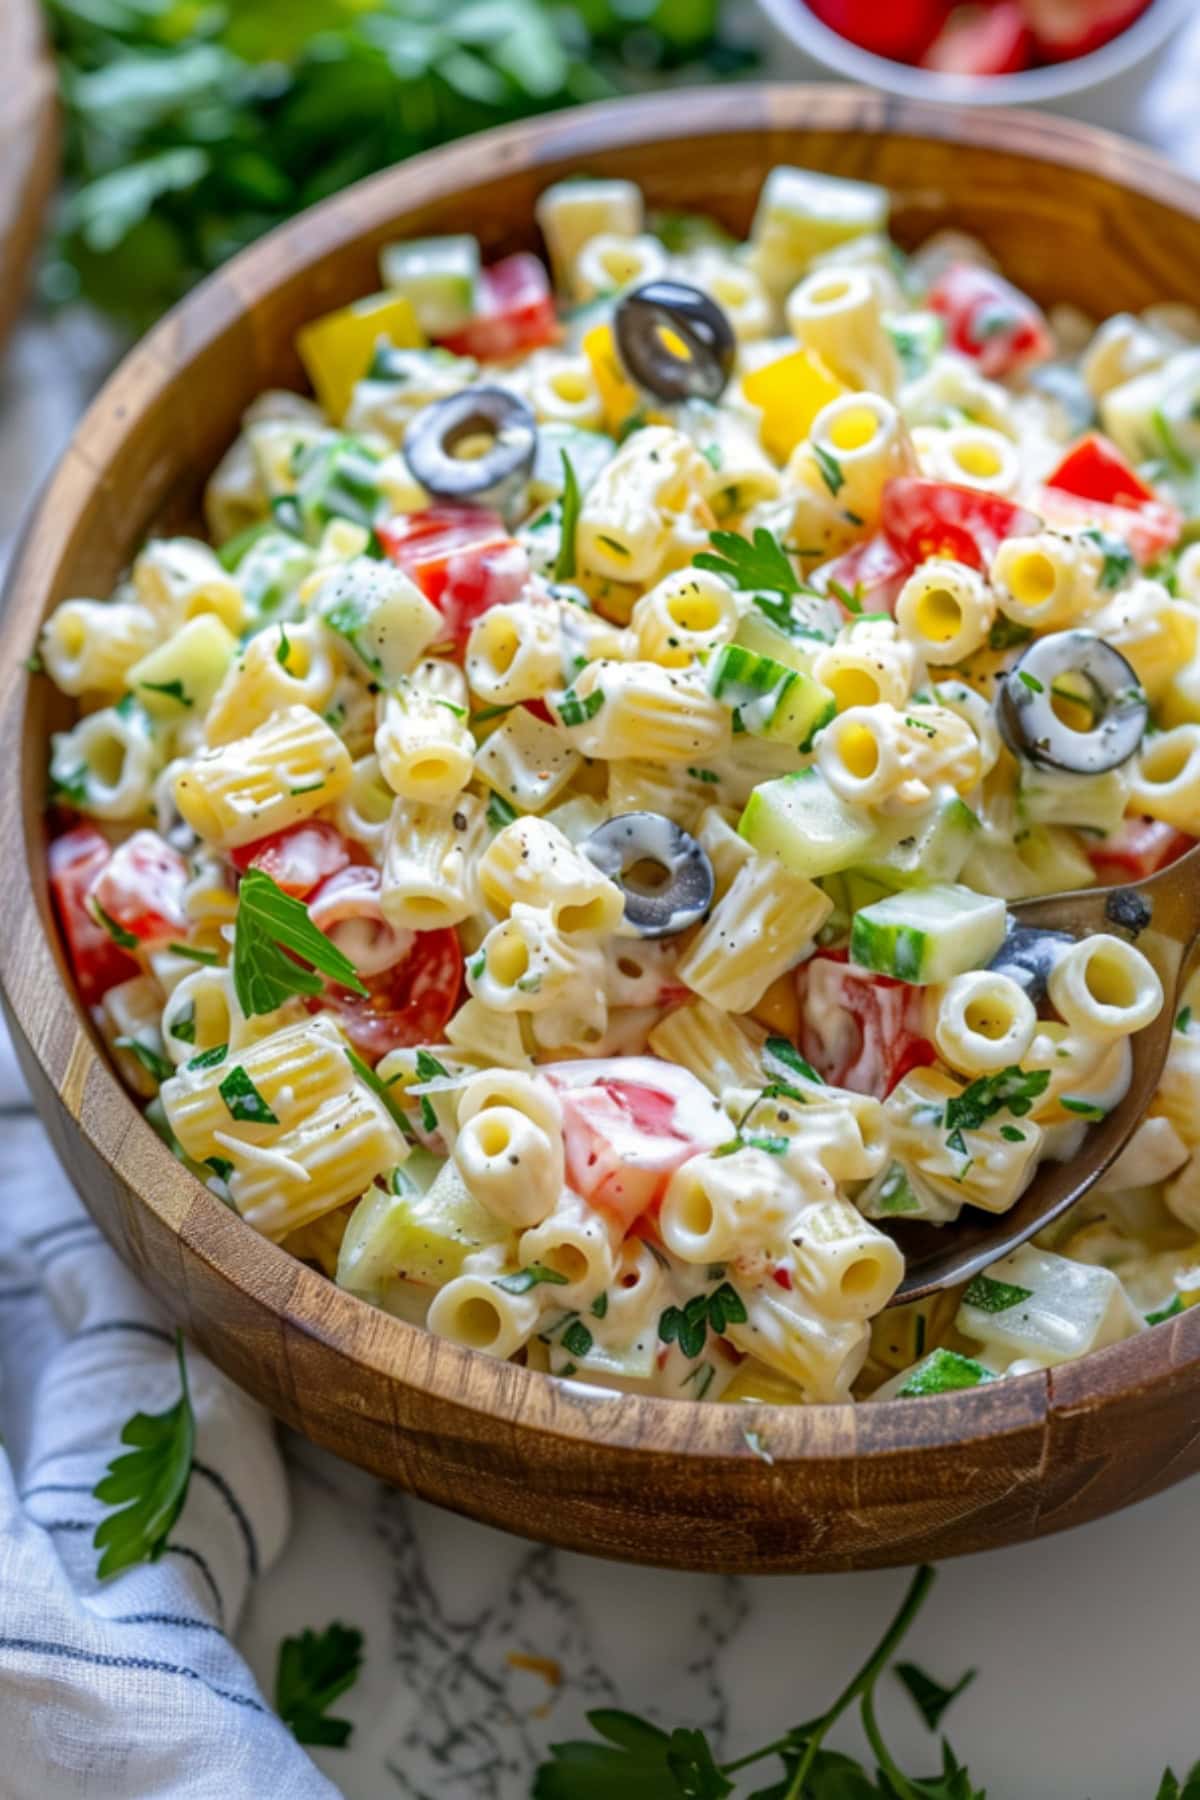 Serving of pasta salad made with ditalini pasta, cherry tomatoes, cucumber, bell pepper, and red onion and creamy dressing served in a wooden bowl.